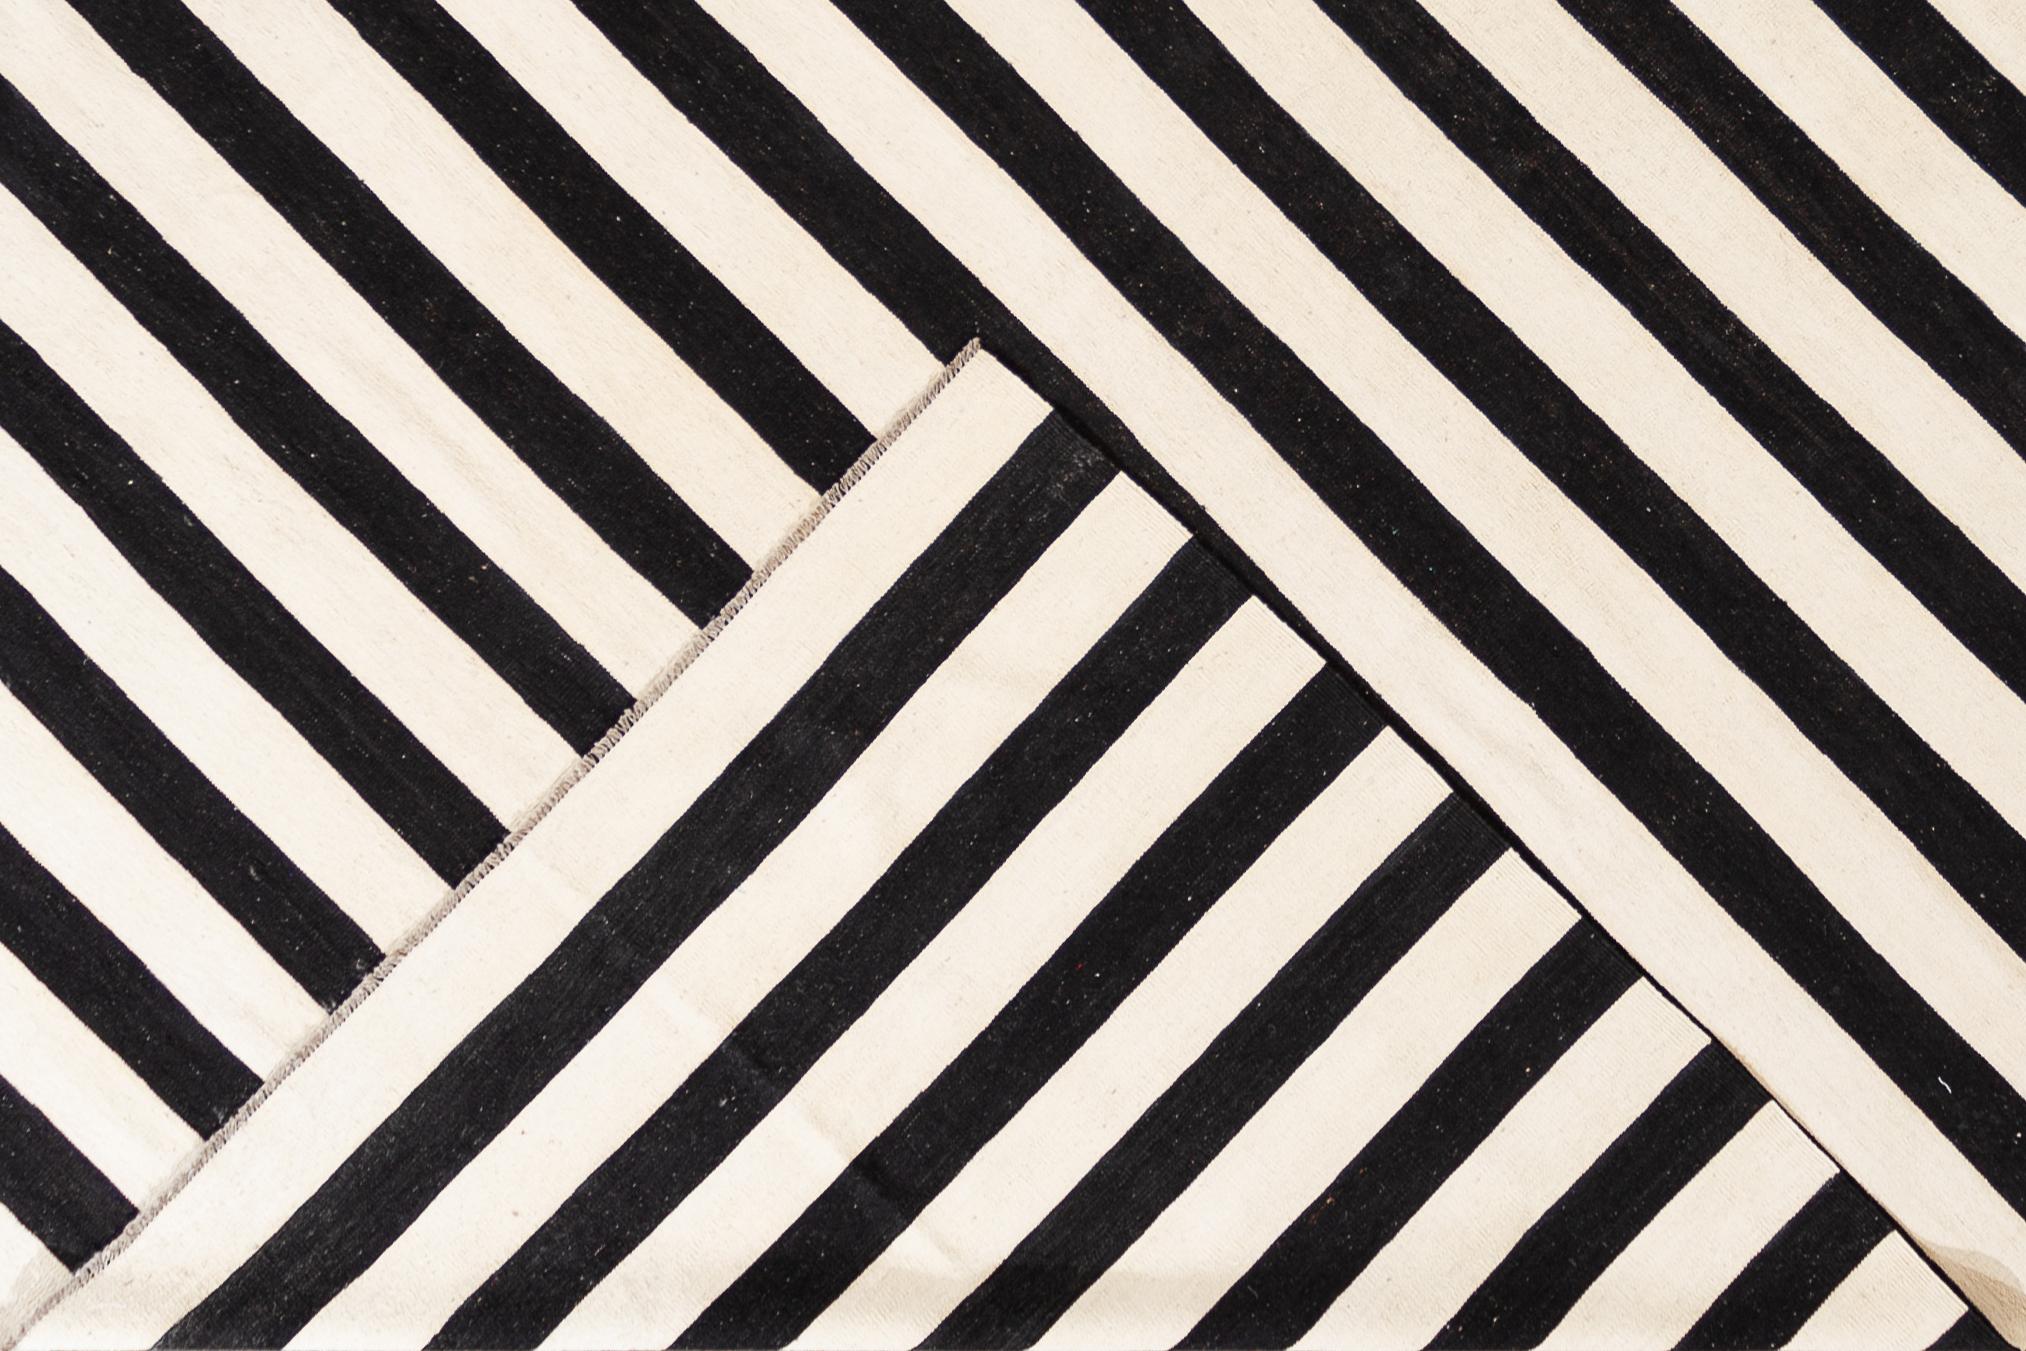 A contemporary oversize black and white striped Kilim rug. This hand-woven flatweave wool rug measures 12'4